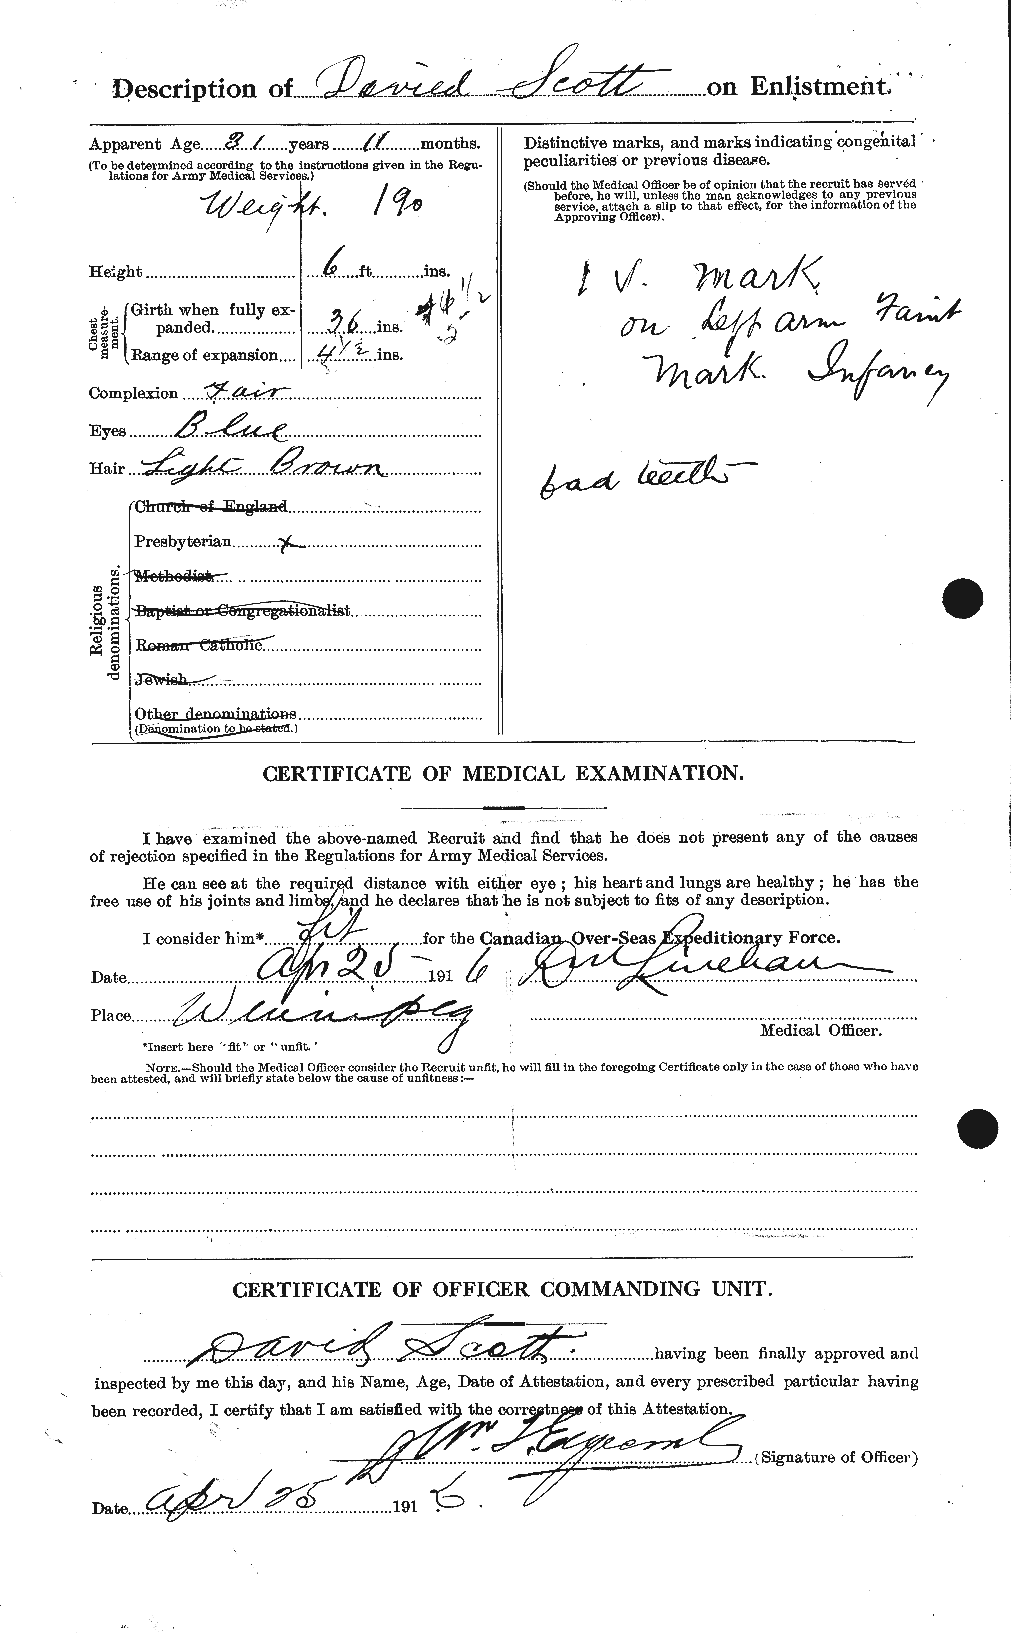 Personnel Records of the First World War - CEF 085366b